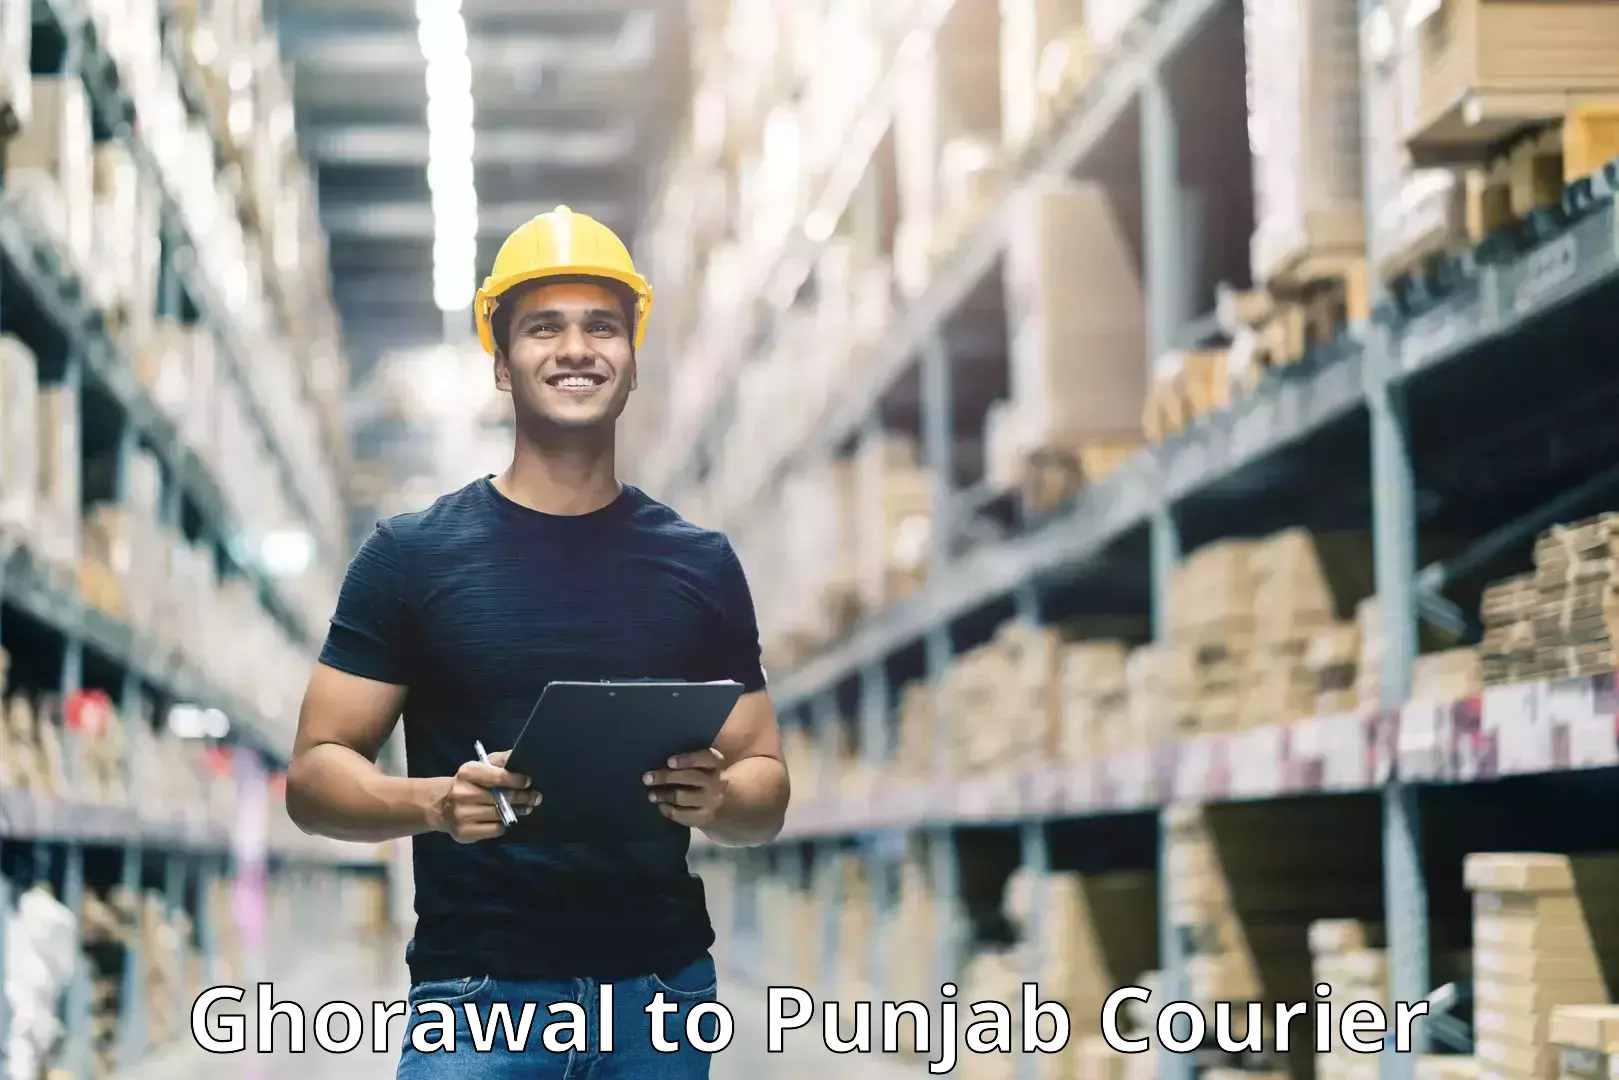 Courier service innovation Ghorawal to Malerkotla